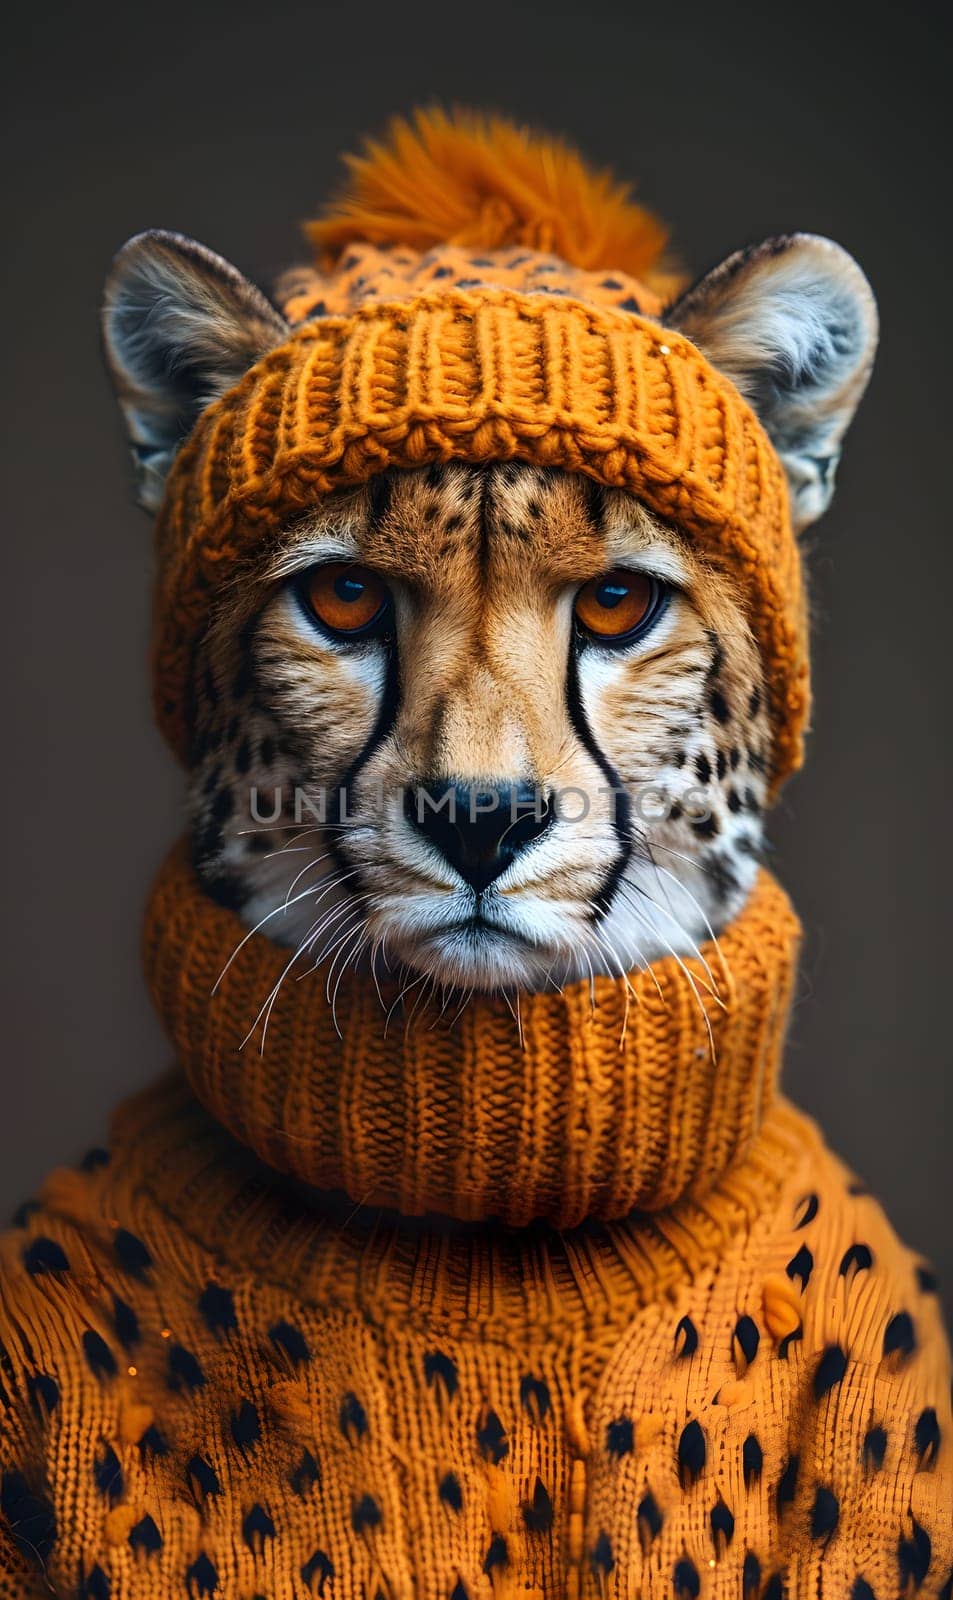 A Felidae carnivore adorned in a hat and sweater, resembling a Siberian tiger in an artistic portrayal. This Terrestrial animal with whiskers is a playful twist on traditional images of Bengal tigers